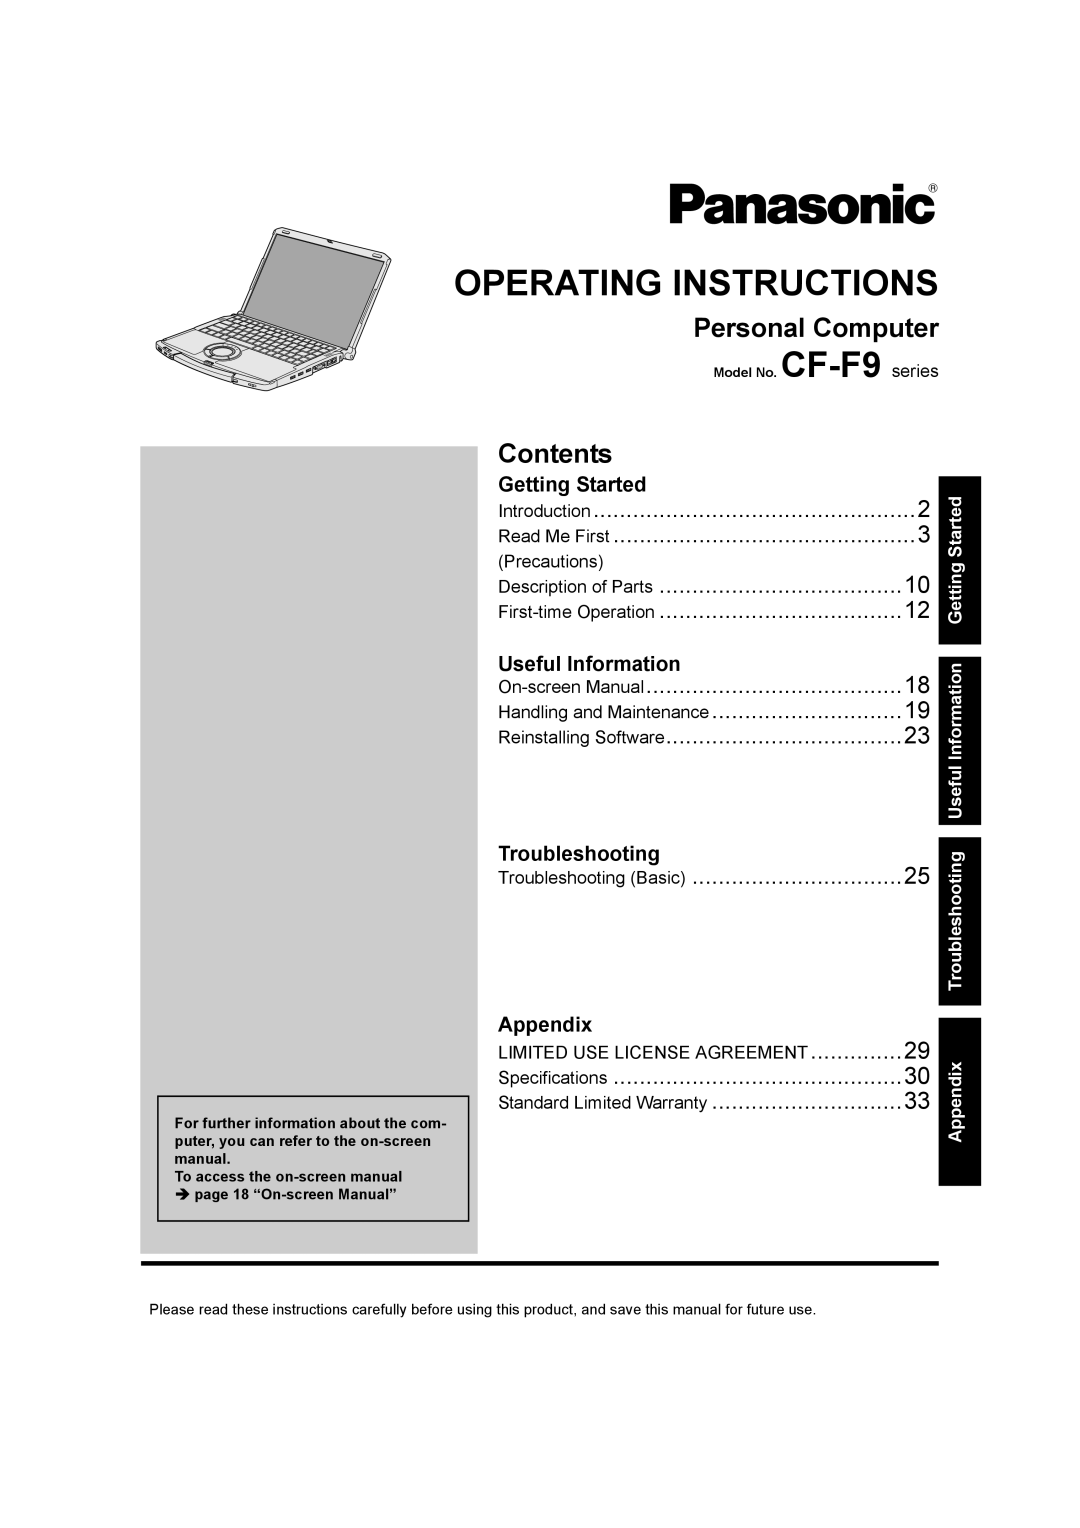 Panasonic CF-F9 appendix Operating Instructions, Personal Computer, Contents, Getting Started, Read Me First, Appendix 